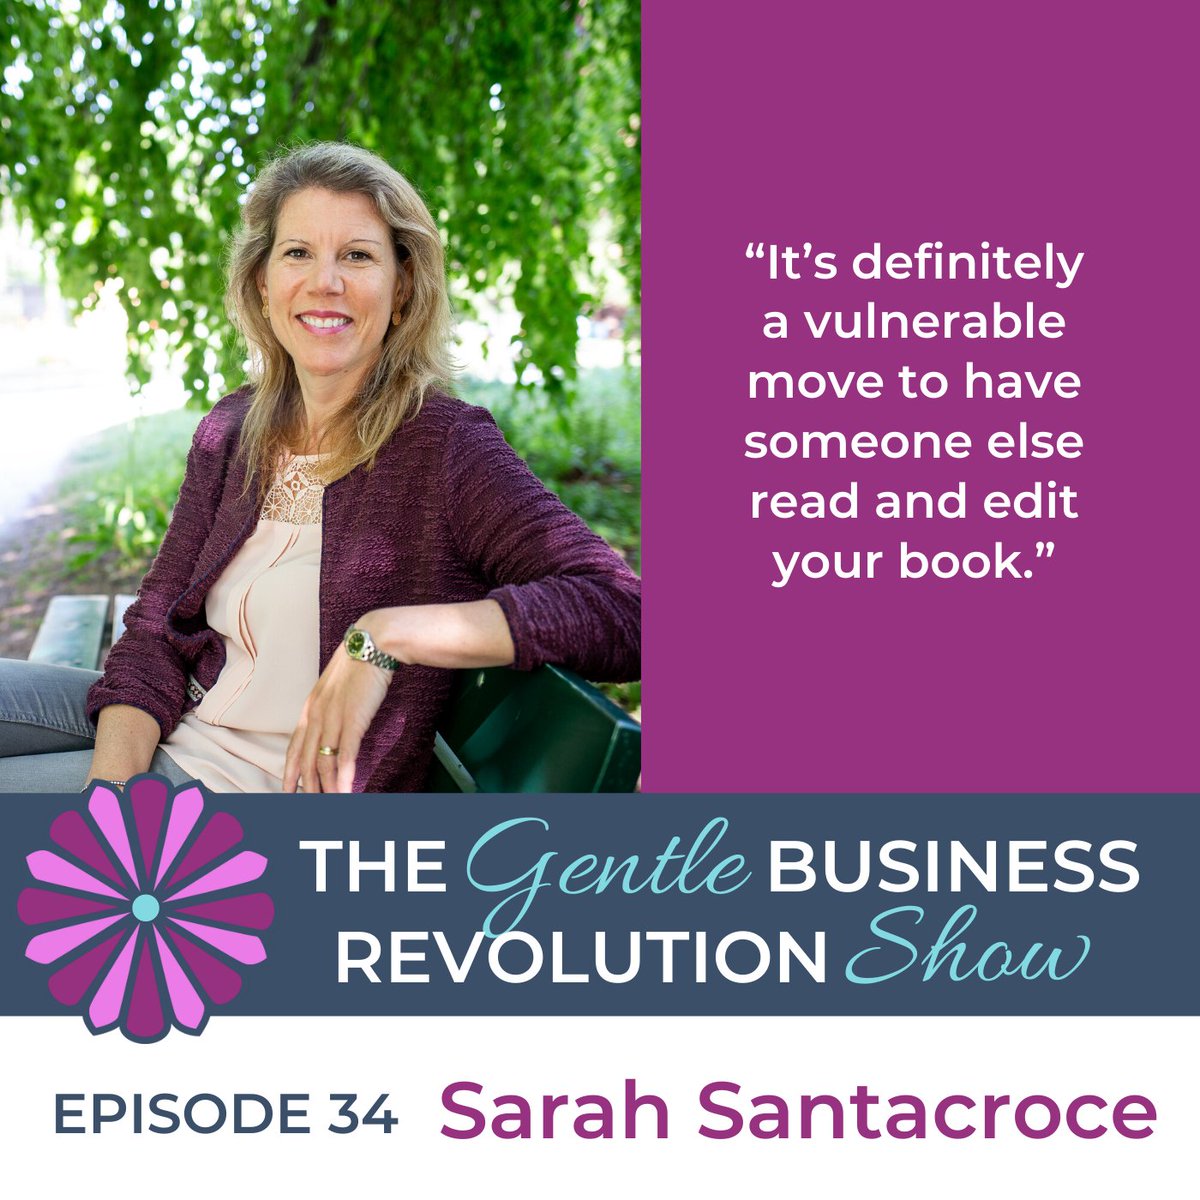 “It’s definitely a vulnerable move to have someone else read and edit your book.” - Sarah Santacroce 

#podcasting #gentlebusinessrevolution #bookpublishing #bookwriting

podcasts.apple.com/us/podcast/beh…